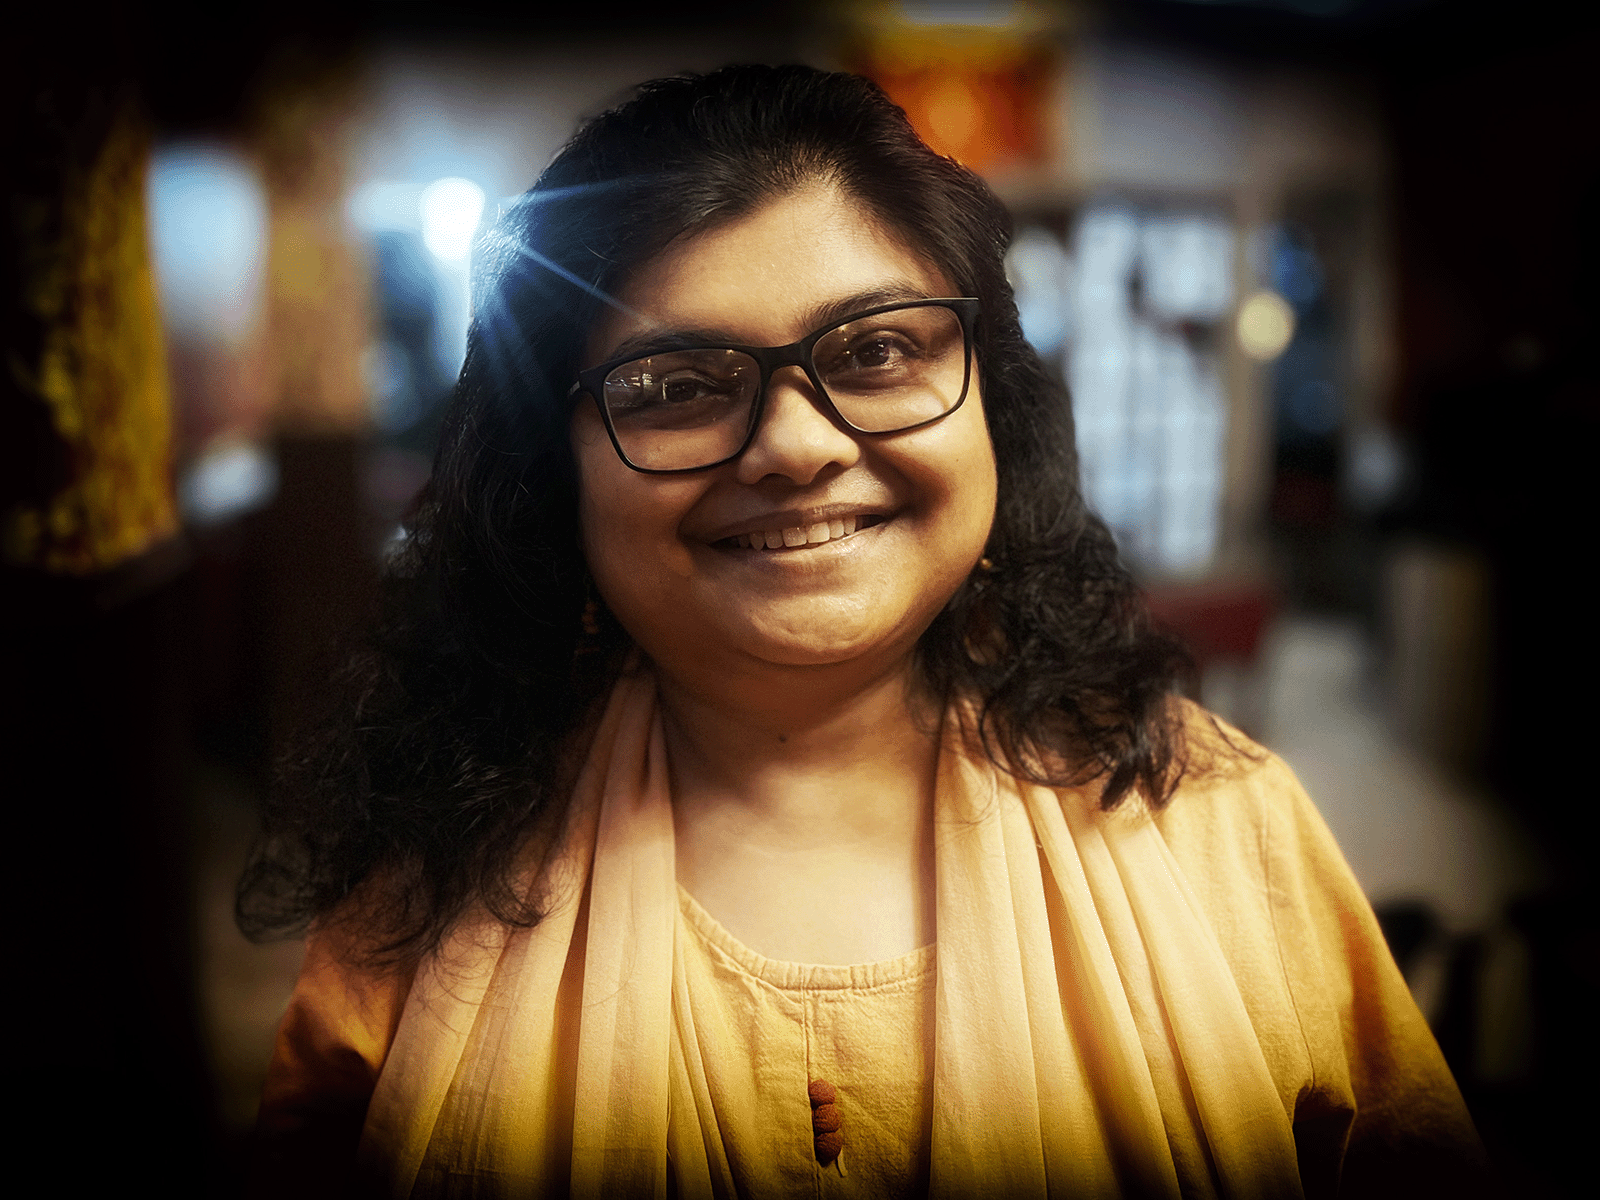 Moupia is an Indian woman with large square glasses, a yellow tunic and wavy brown hair down to her shoulders.